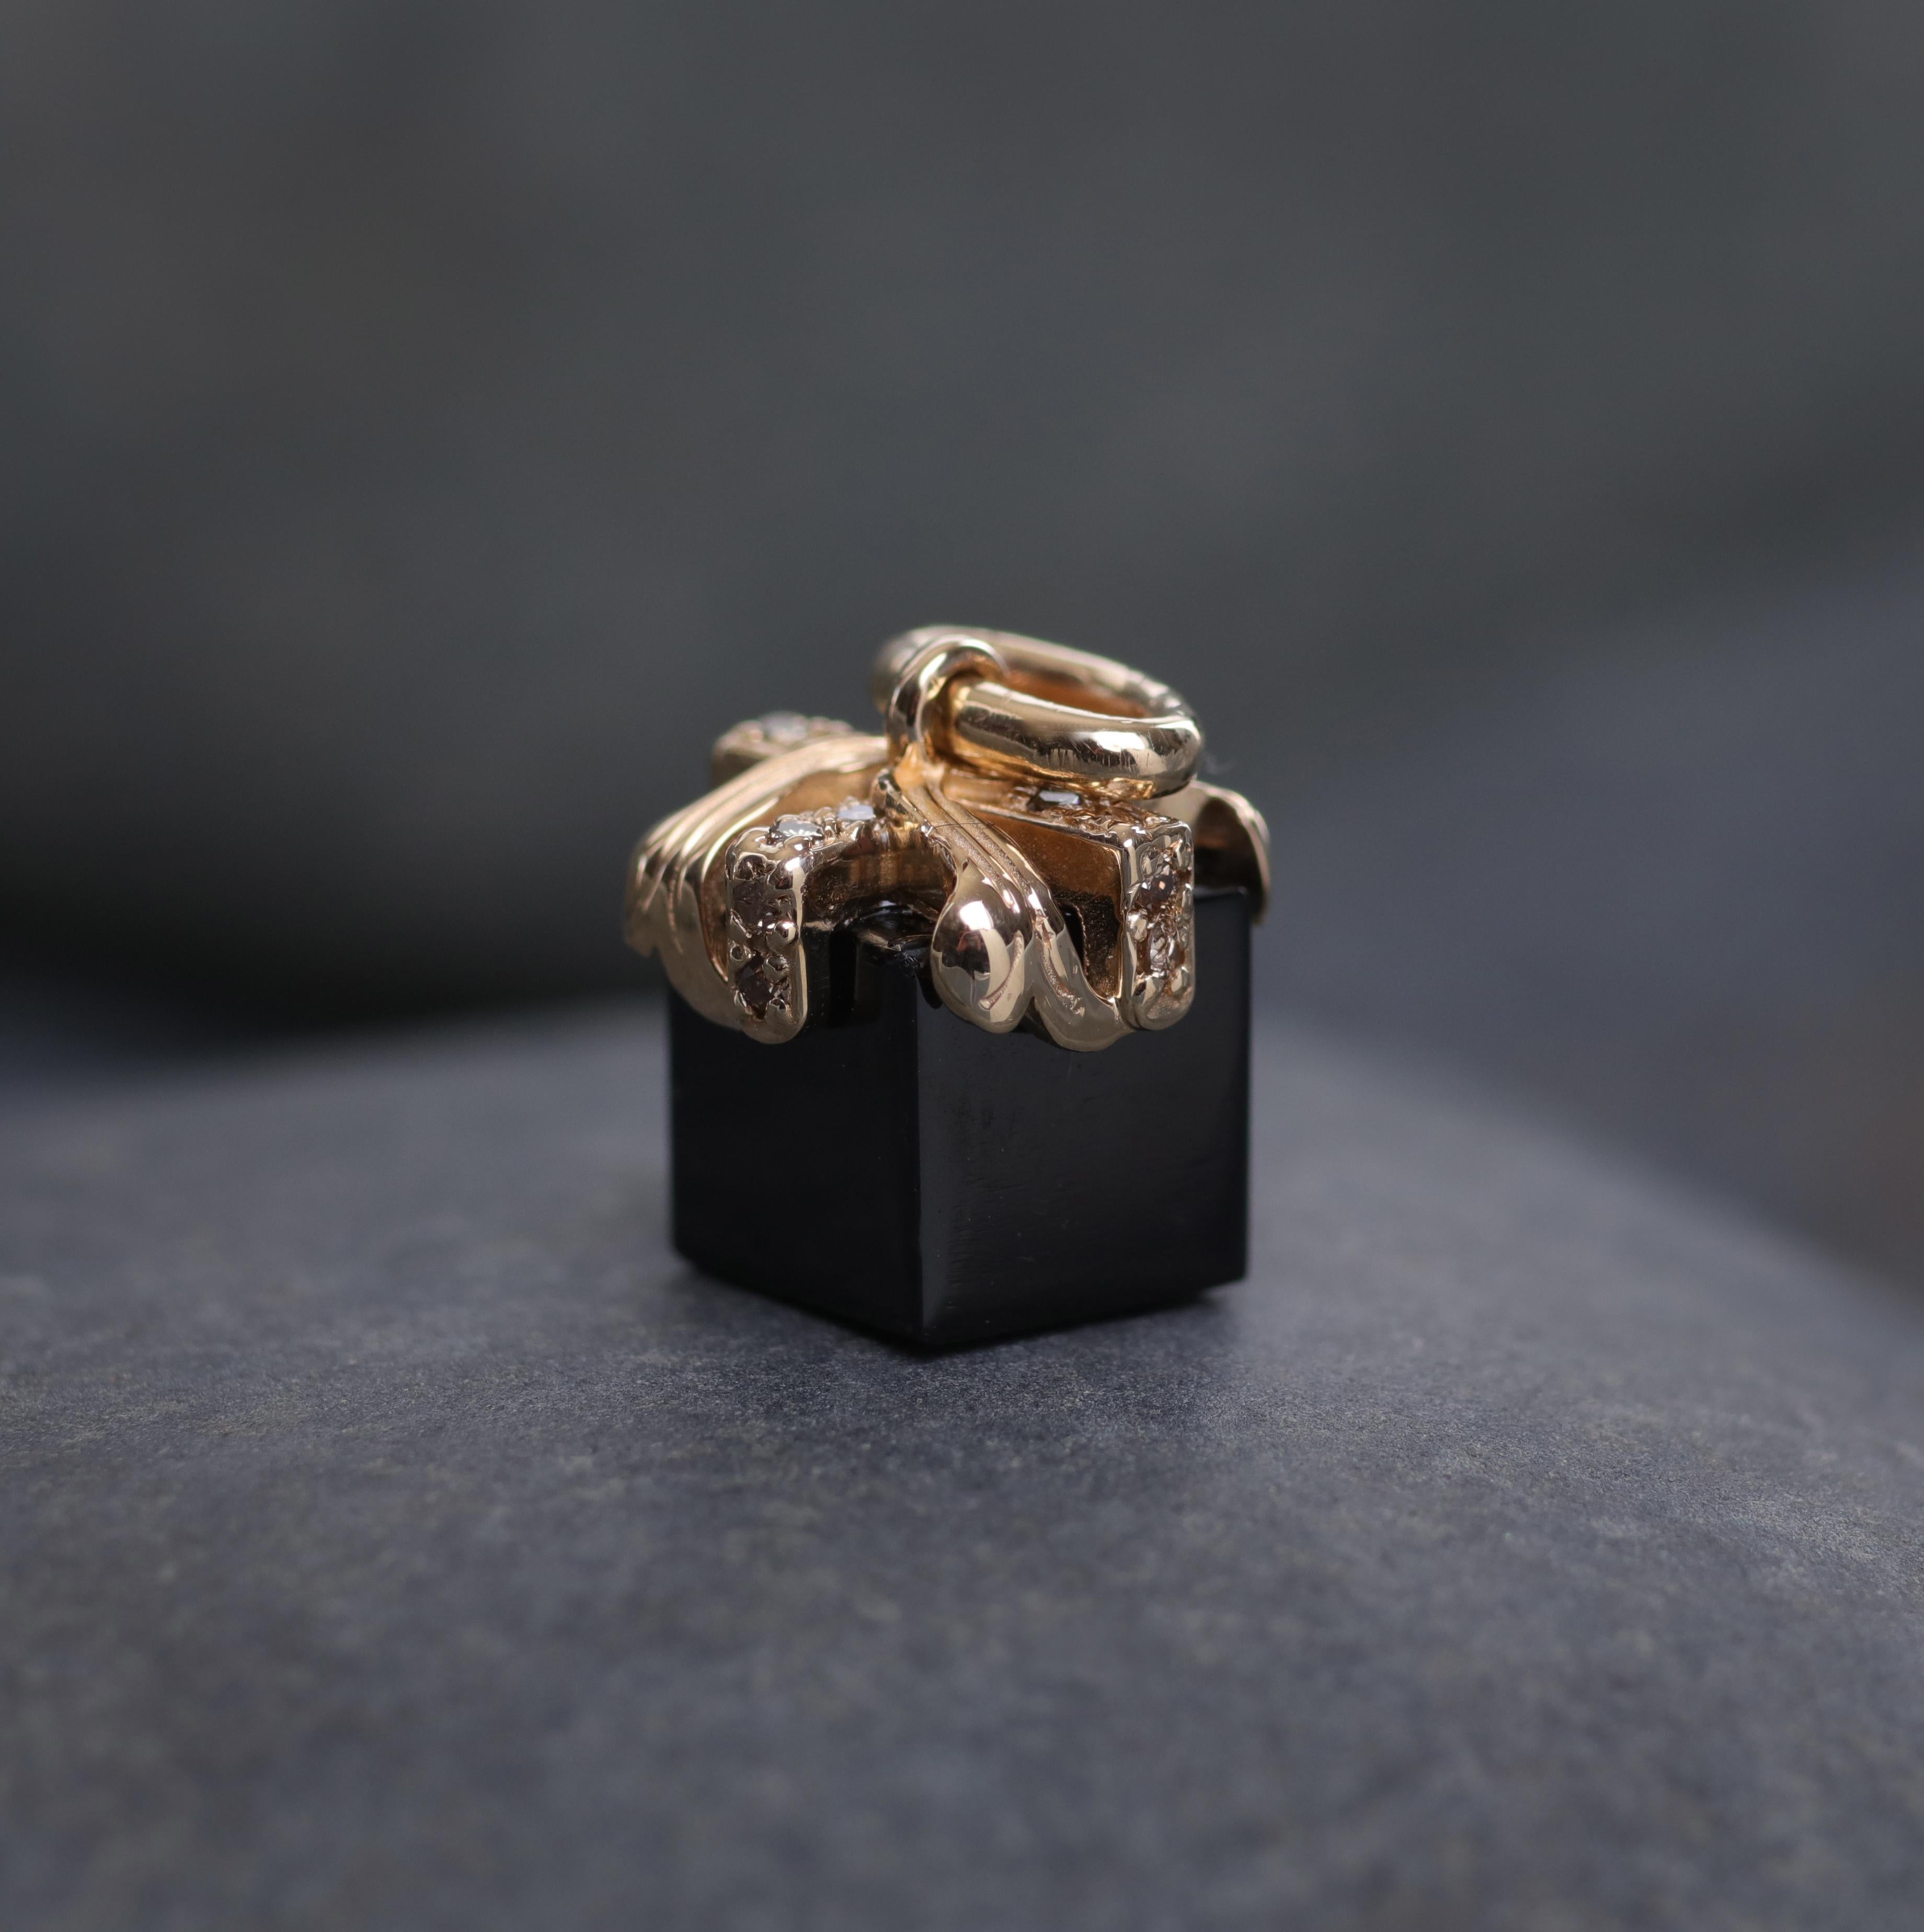 A yellow gold, Champagne diamonds, and black spinel charm that whispers: 